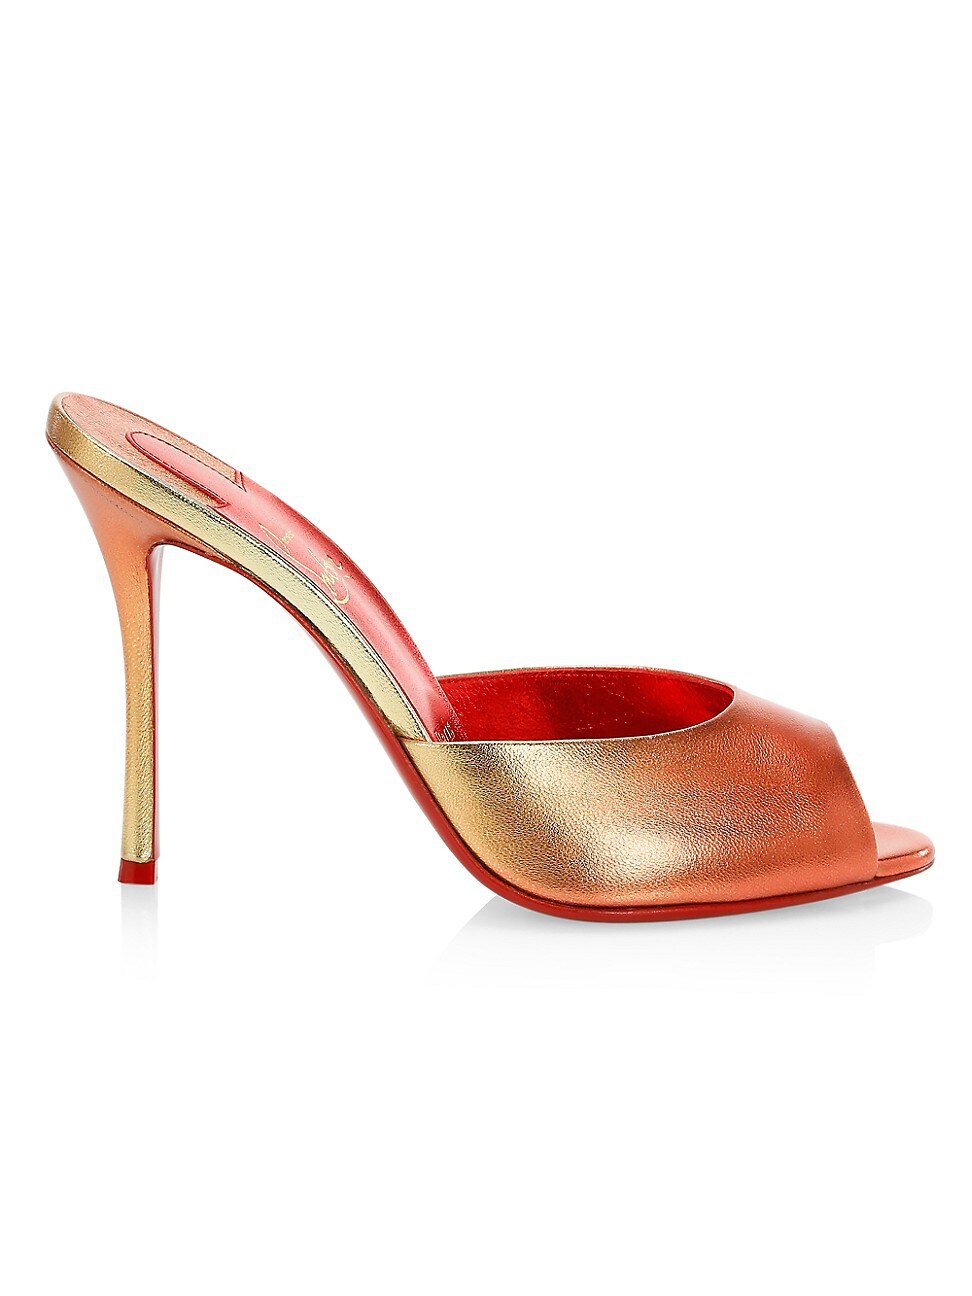 Me Dolly Patent Red Sole Sandals